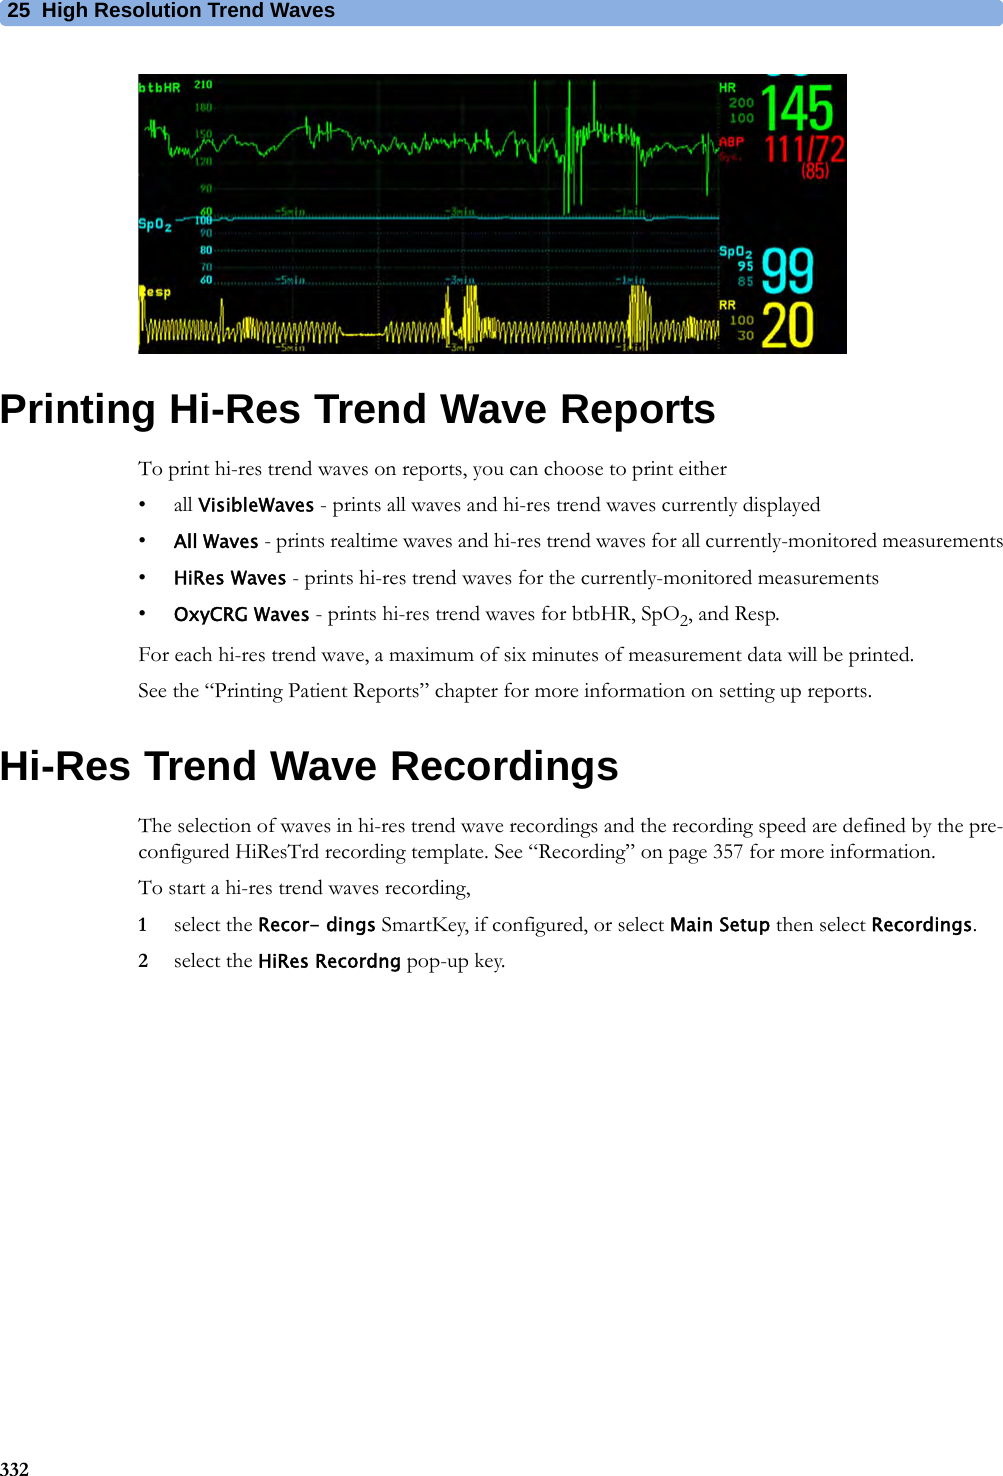 25 High Resolution Trend Waves332Printing Hi-Res Trend Wave ReportsTo print hi-res trend waves on reports, you can choose to print either• all VisibleWaves - prints all waves and hi-res trend waves currently displayed•All Waves - prints realtime waves and hi-res trend waves for all currently-monitored measurements•HiRes Waves - prints hi-res trend waves for the currently-monitored measurements•OxyCRG Waves - prints hi-res trend waves for btbHR, SpO2, and Resp.For each hi-res trend wave, a maximum of six minutes of measurement data will be printed.See the “Printing Patient Reports” chapter for more information on setting up reports.Hi-Res Trend Wave RecordingsThe selection of waves in hi-res trend wave recordings and the recording speed are defined by the pre-configured HiResTrd recording template. See “Recording” on page 357 for more information.To start a hi-res trend waves recording,1select the Recor- dings SmartKey, if configured, or select Main Setup then select Recordings.2select the HiRes Recordng pop-up key.